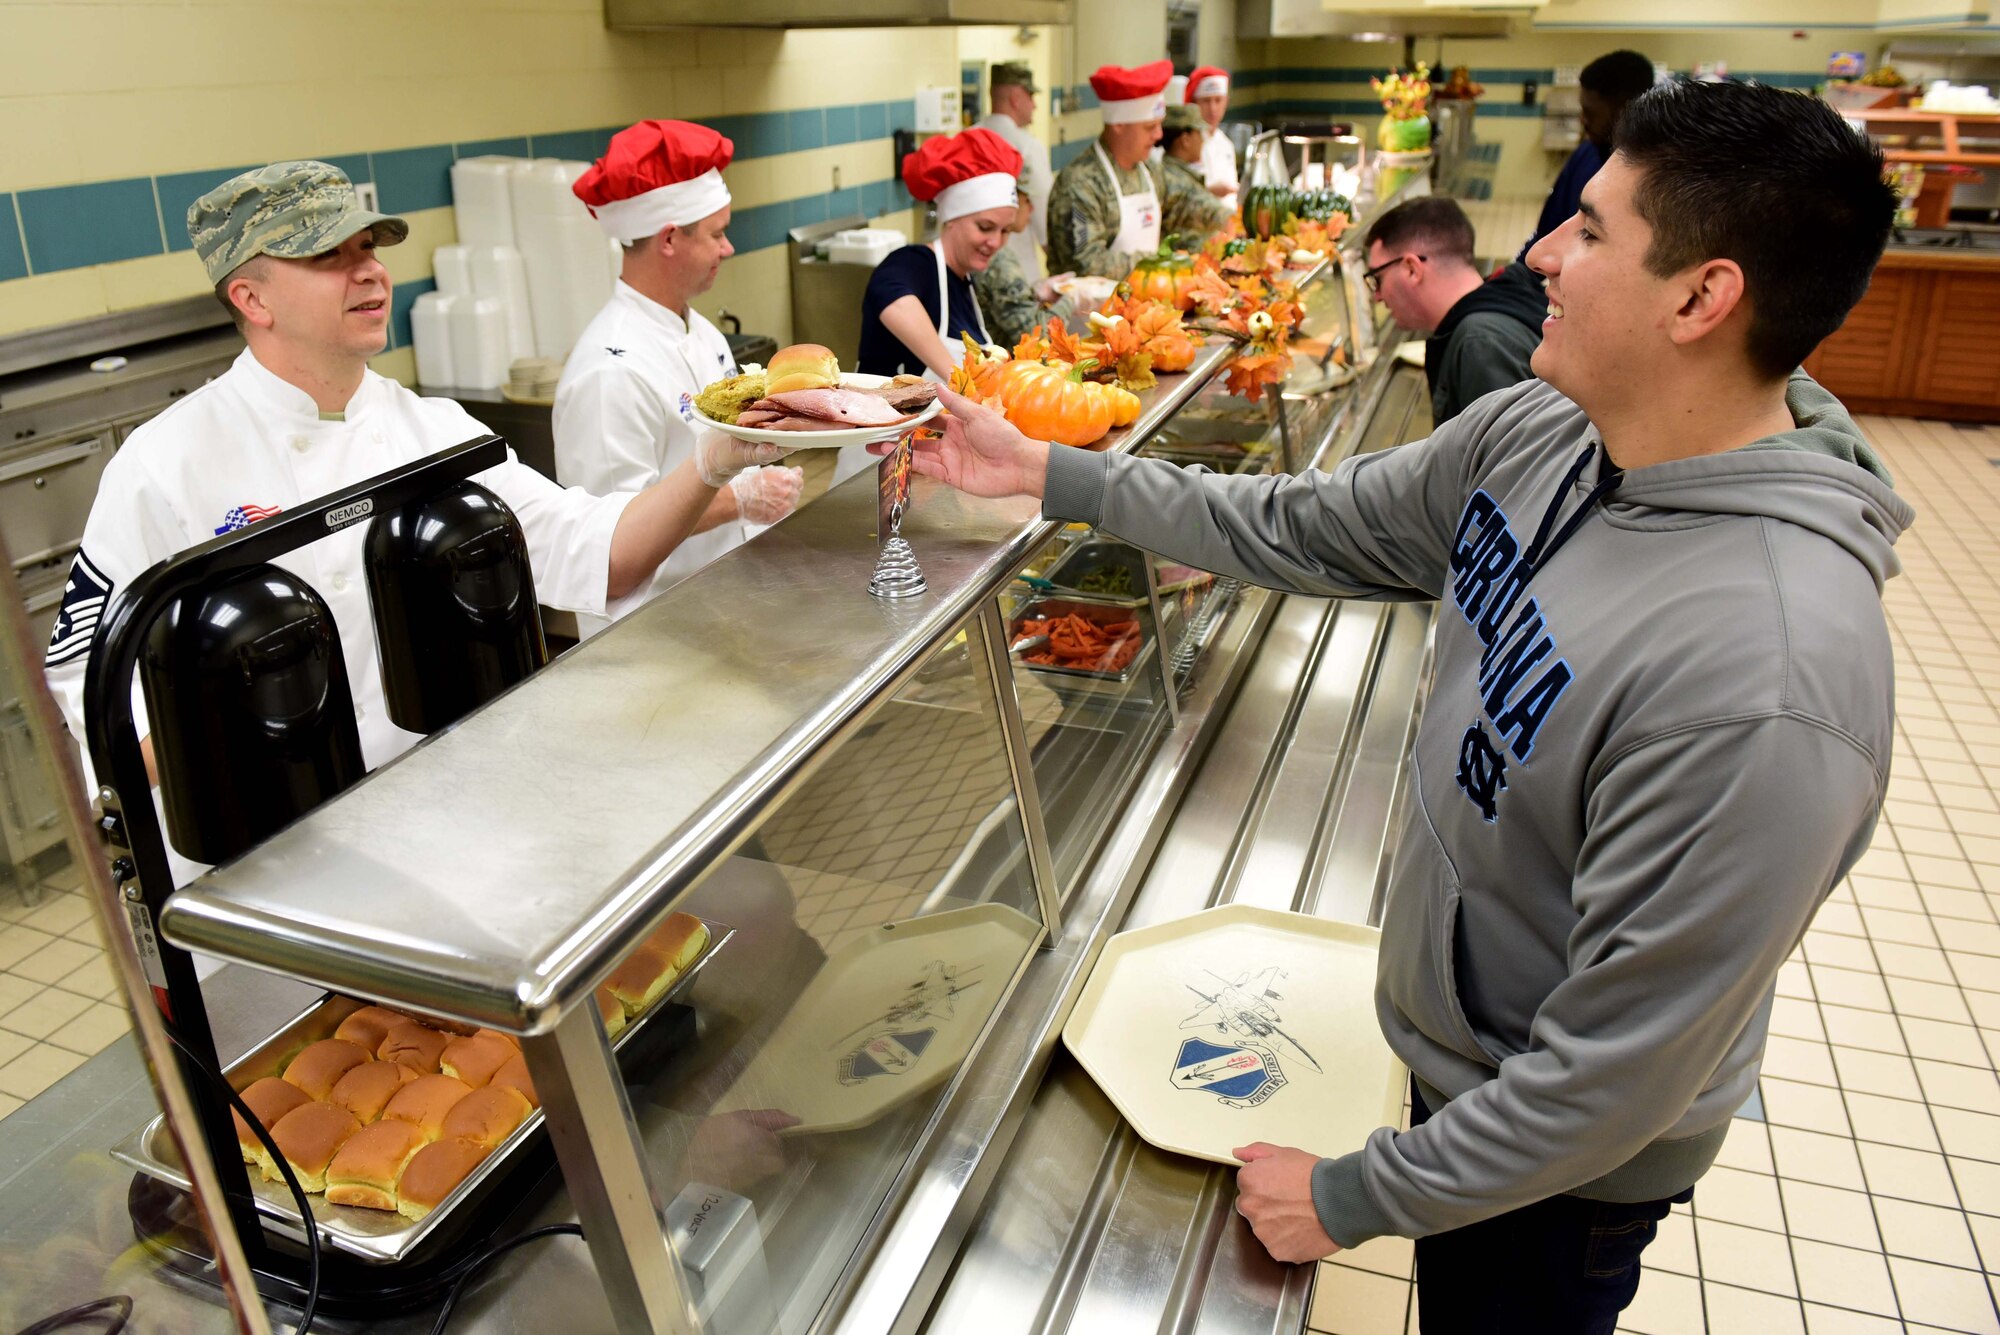 Master Sgt. Joshua McLaughlin, 4th Force Support Squadron first sergeant, serves a meal to Airman Christian Ramirez, F-15E Strike Eagle student crew chief, at the 4th FSS dining facility Nov. 23, 2017, at Seymour Johnson Air Force Base, North Carolina. Base leaders helped serve more than 150 meals to dining facility guests on Thanksgiving Day. (U.S. Air Force photo by Airman 1st Class Kenneth Boyton)